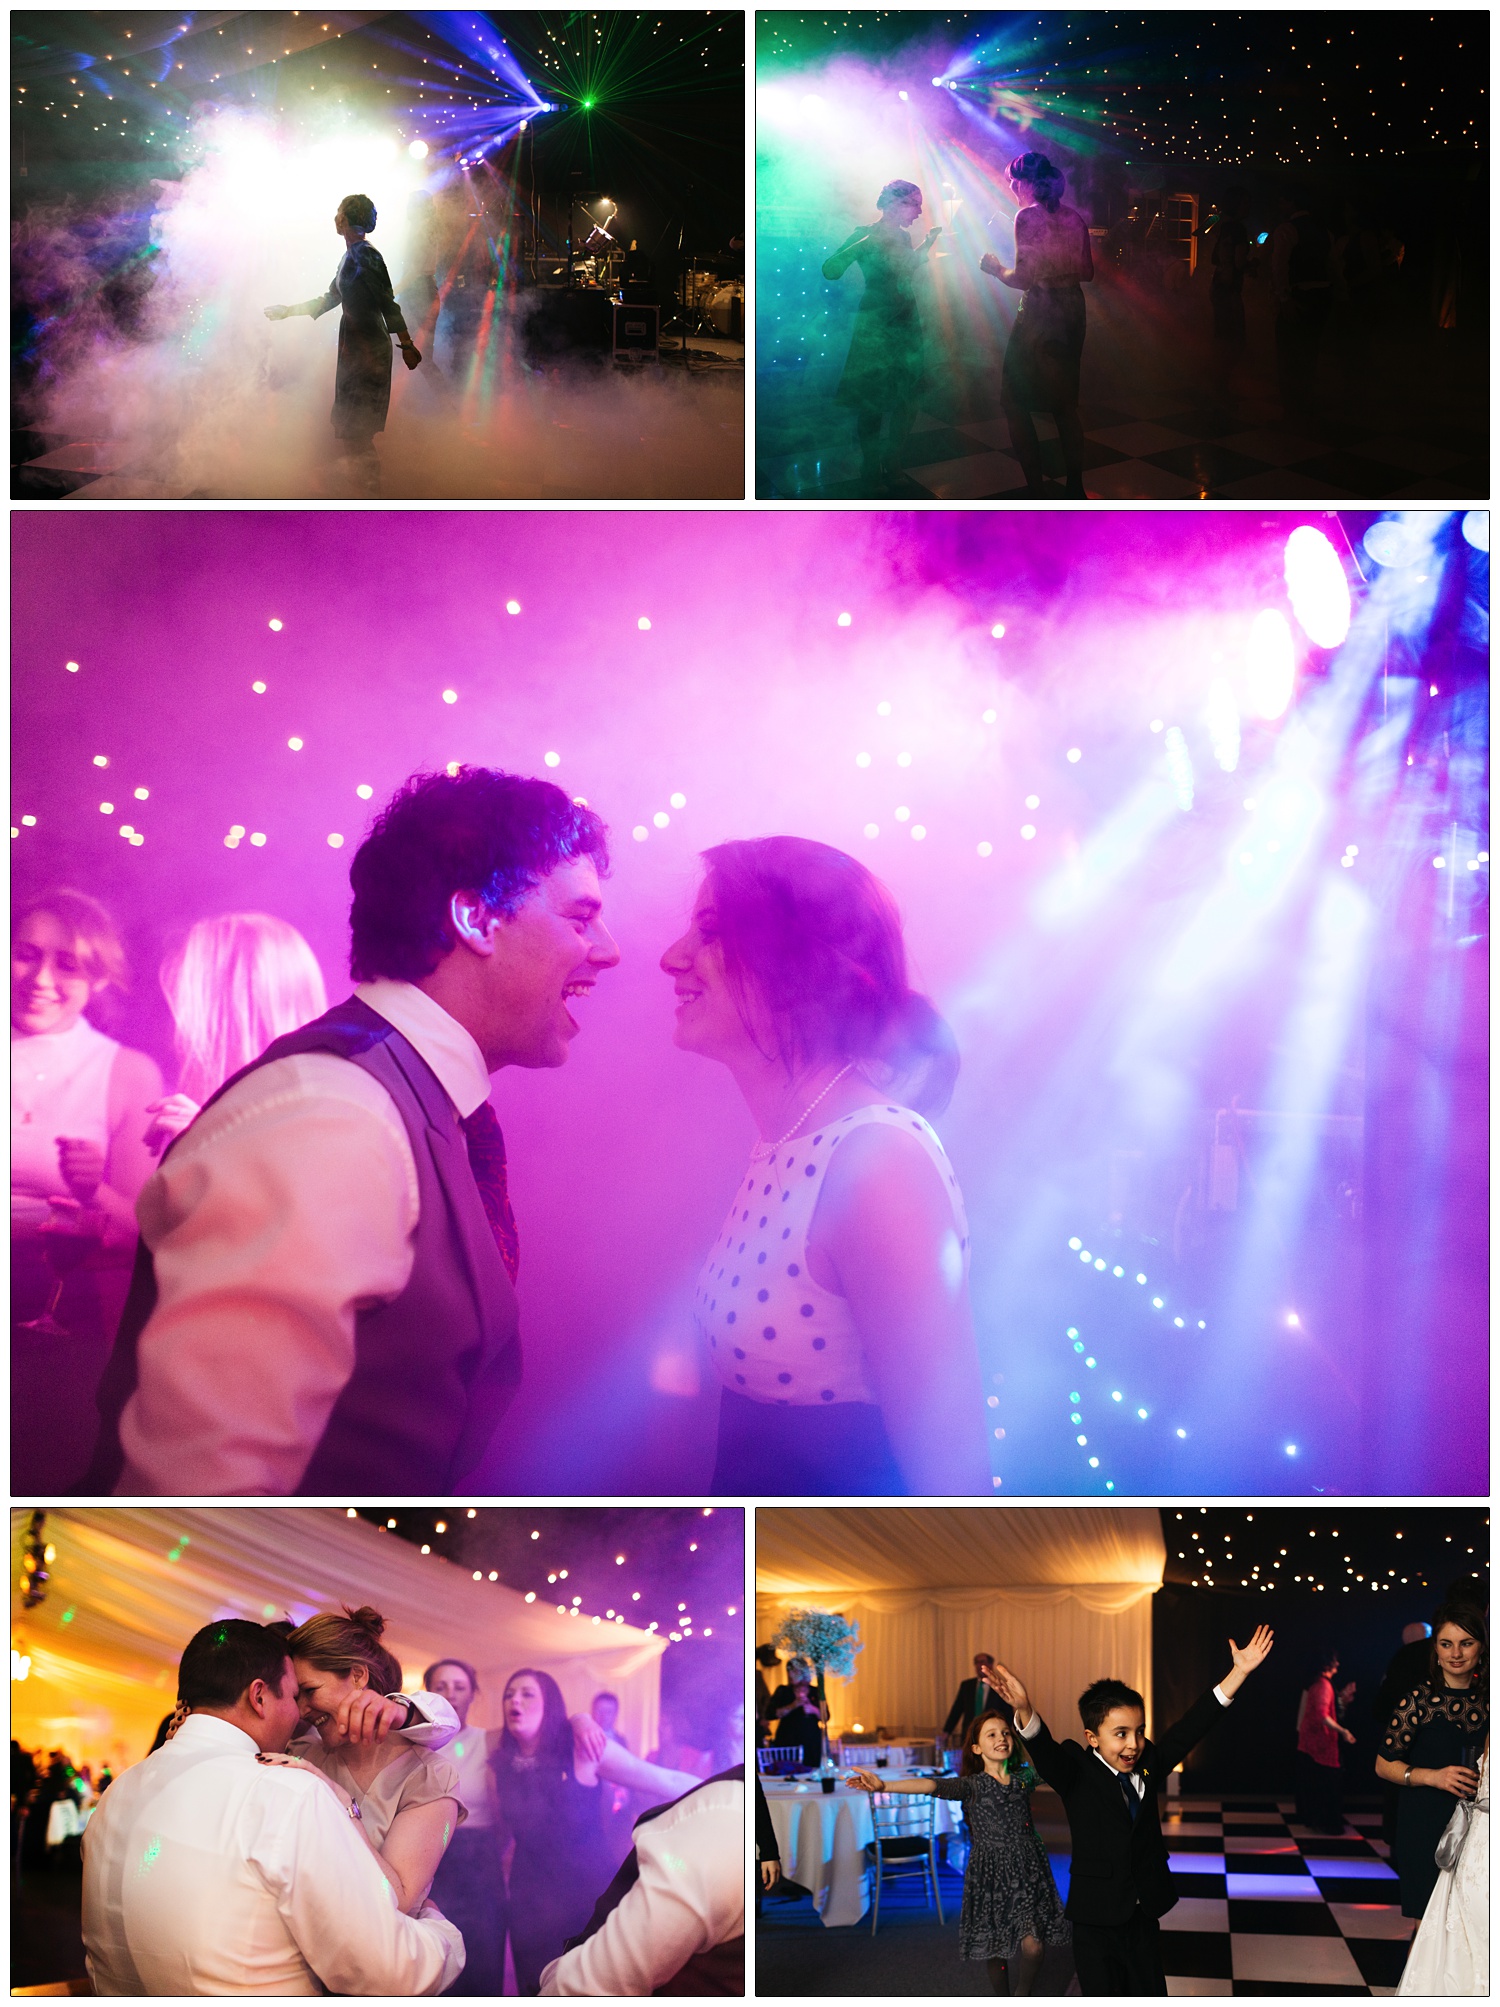 A smoke machine and coloured lights at a wedding reception. A man is singing at a woman.